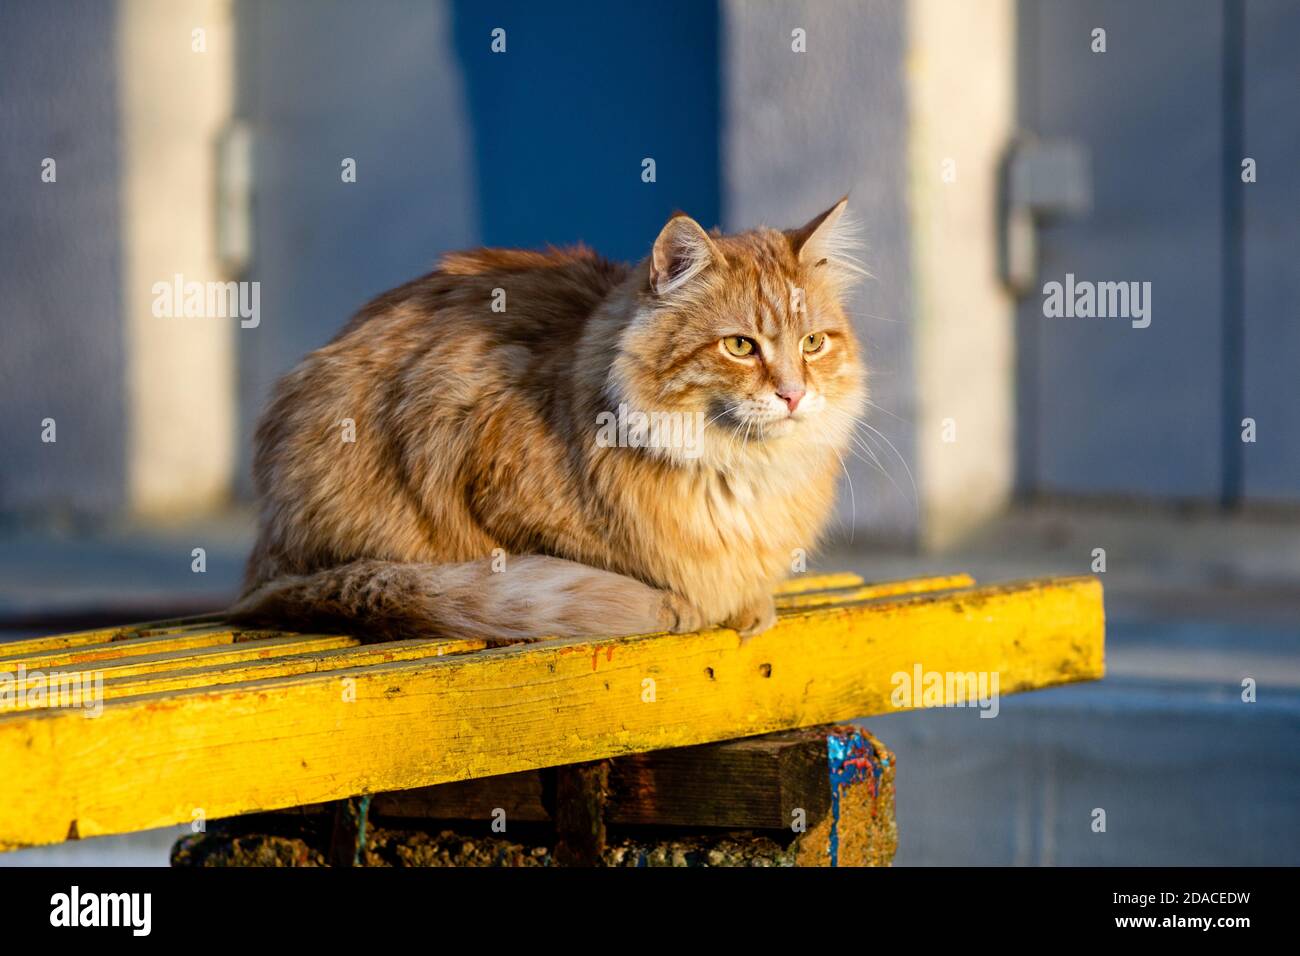 Red fluffy cat on a yellow bench Stock Photo